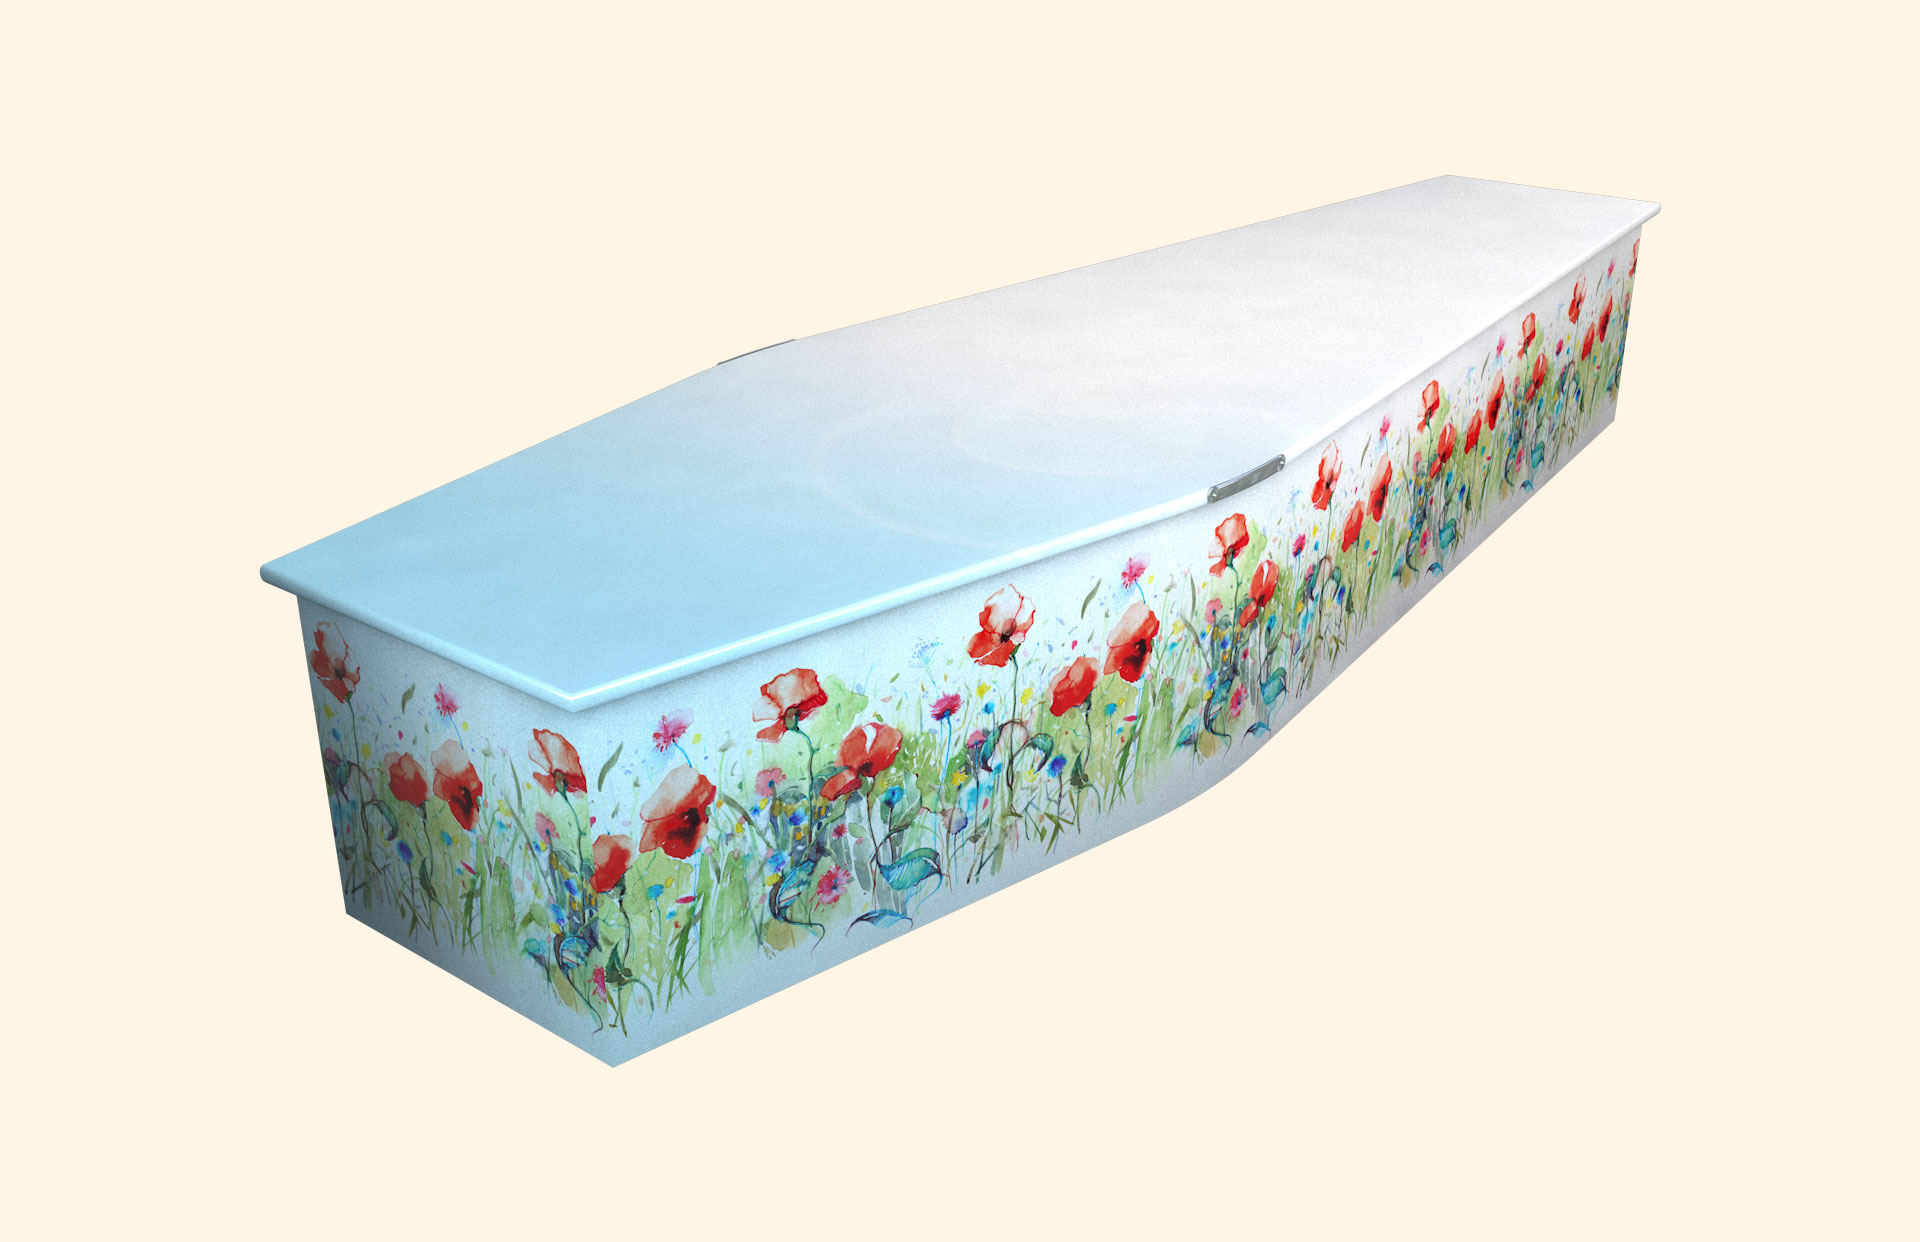 Watercolour Poppies in blue on a traditional coffin